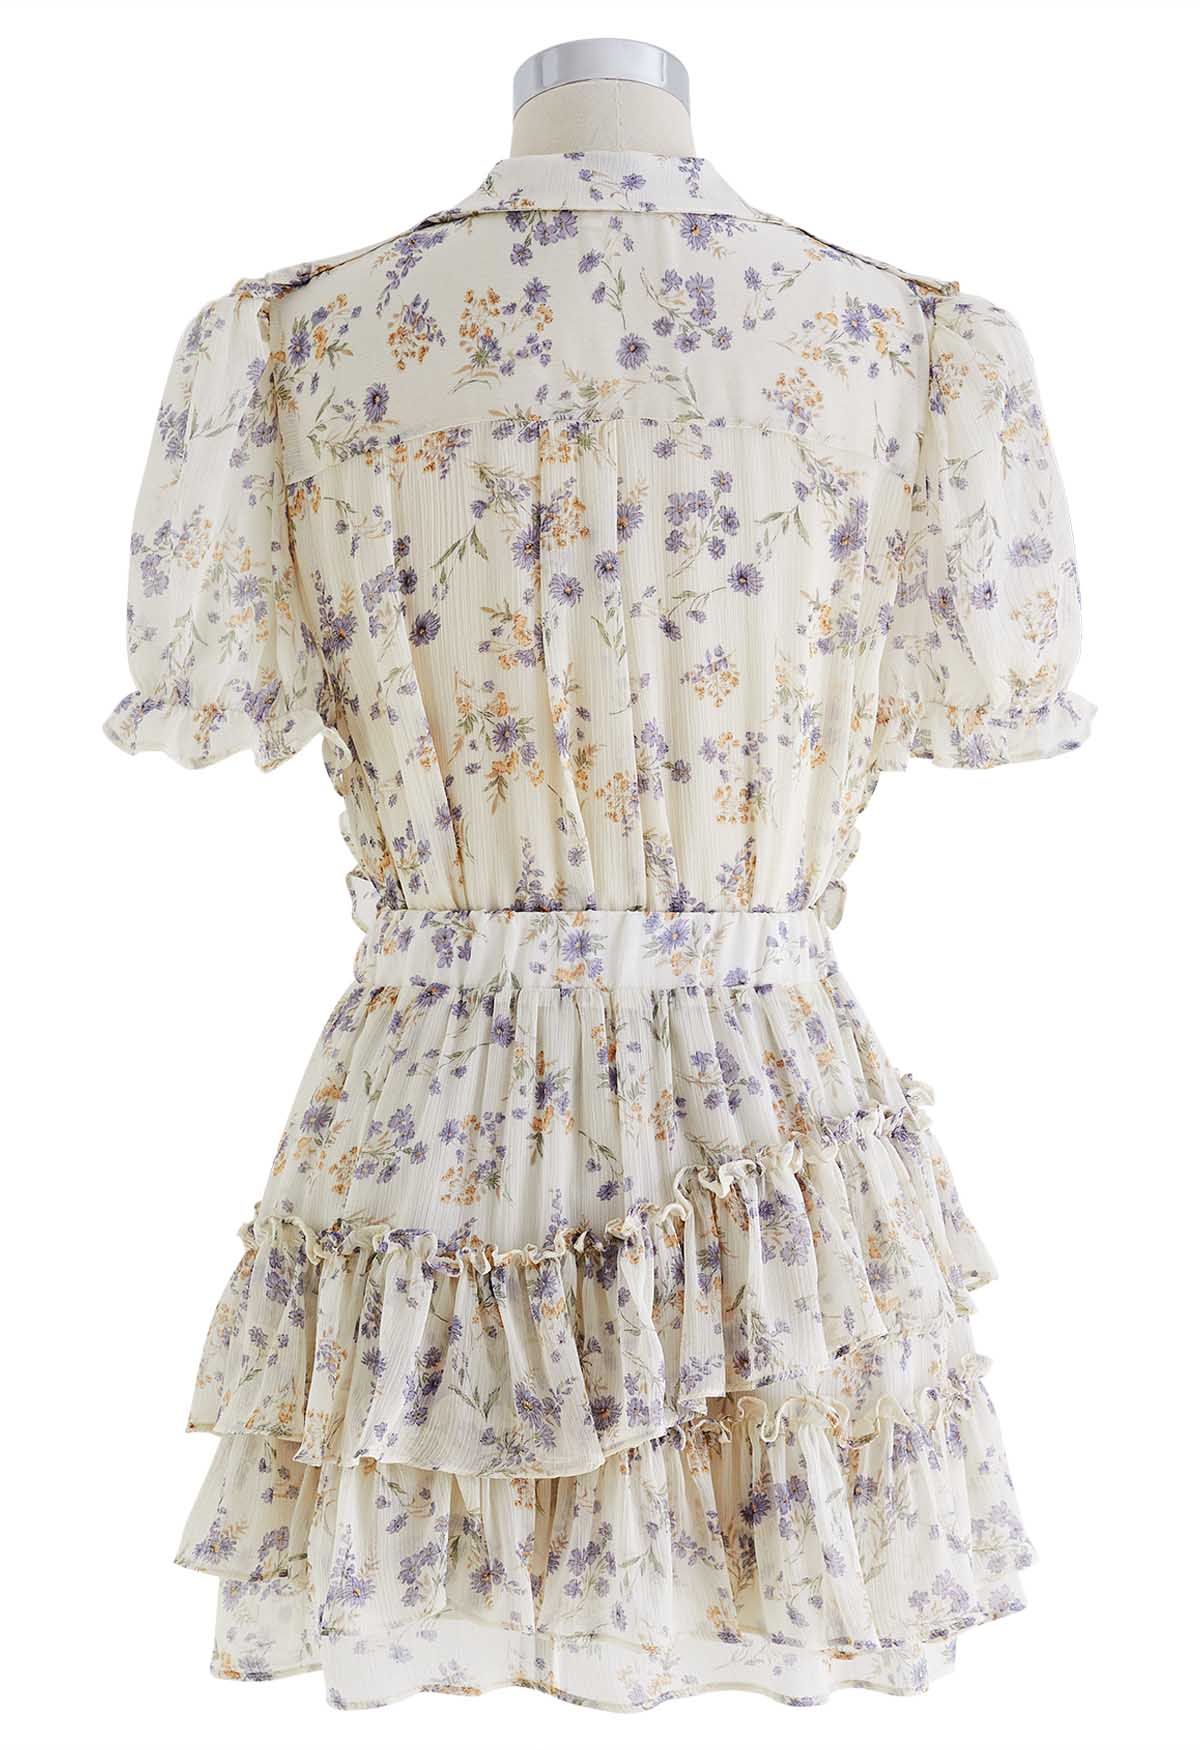 Ruffle Chiffon Top and Tiered Mini Skorts Set in Cream Floral